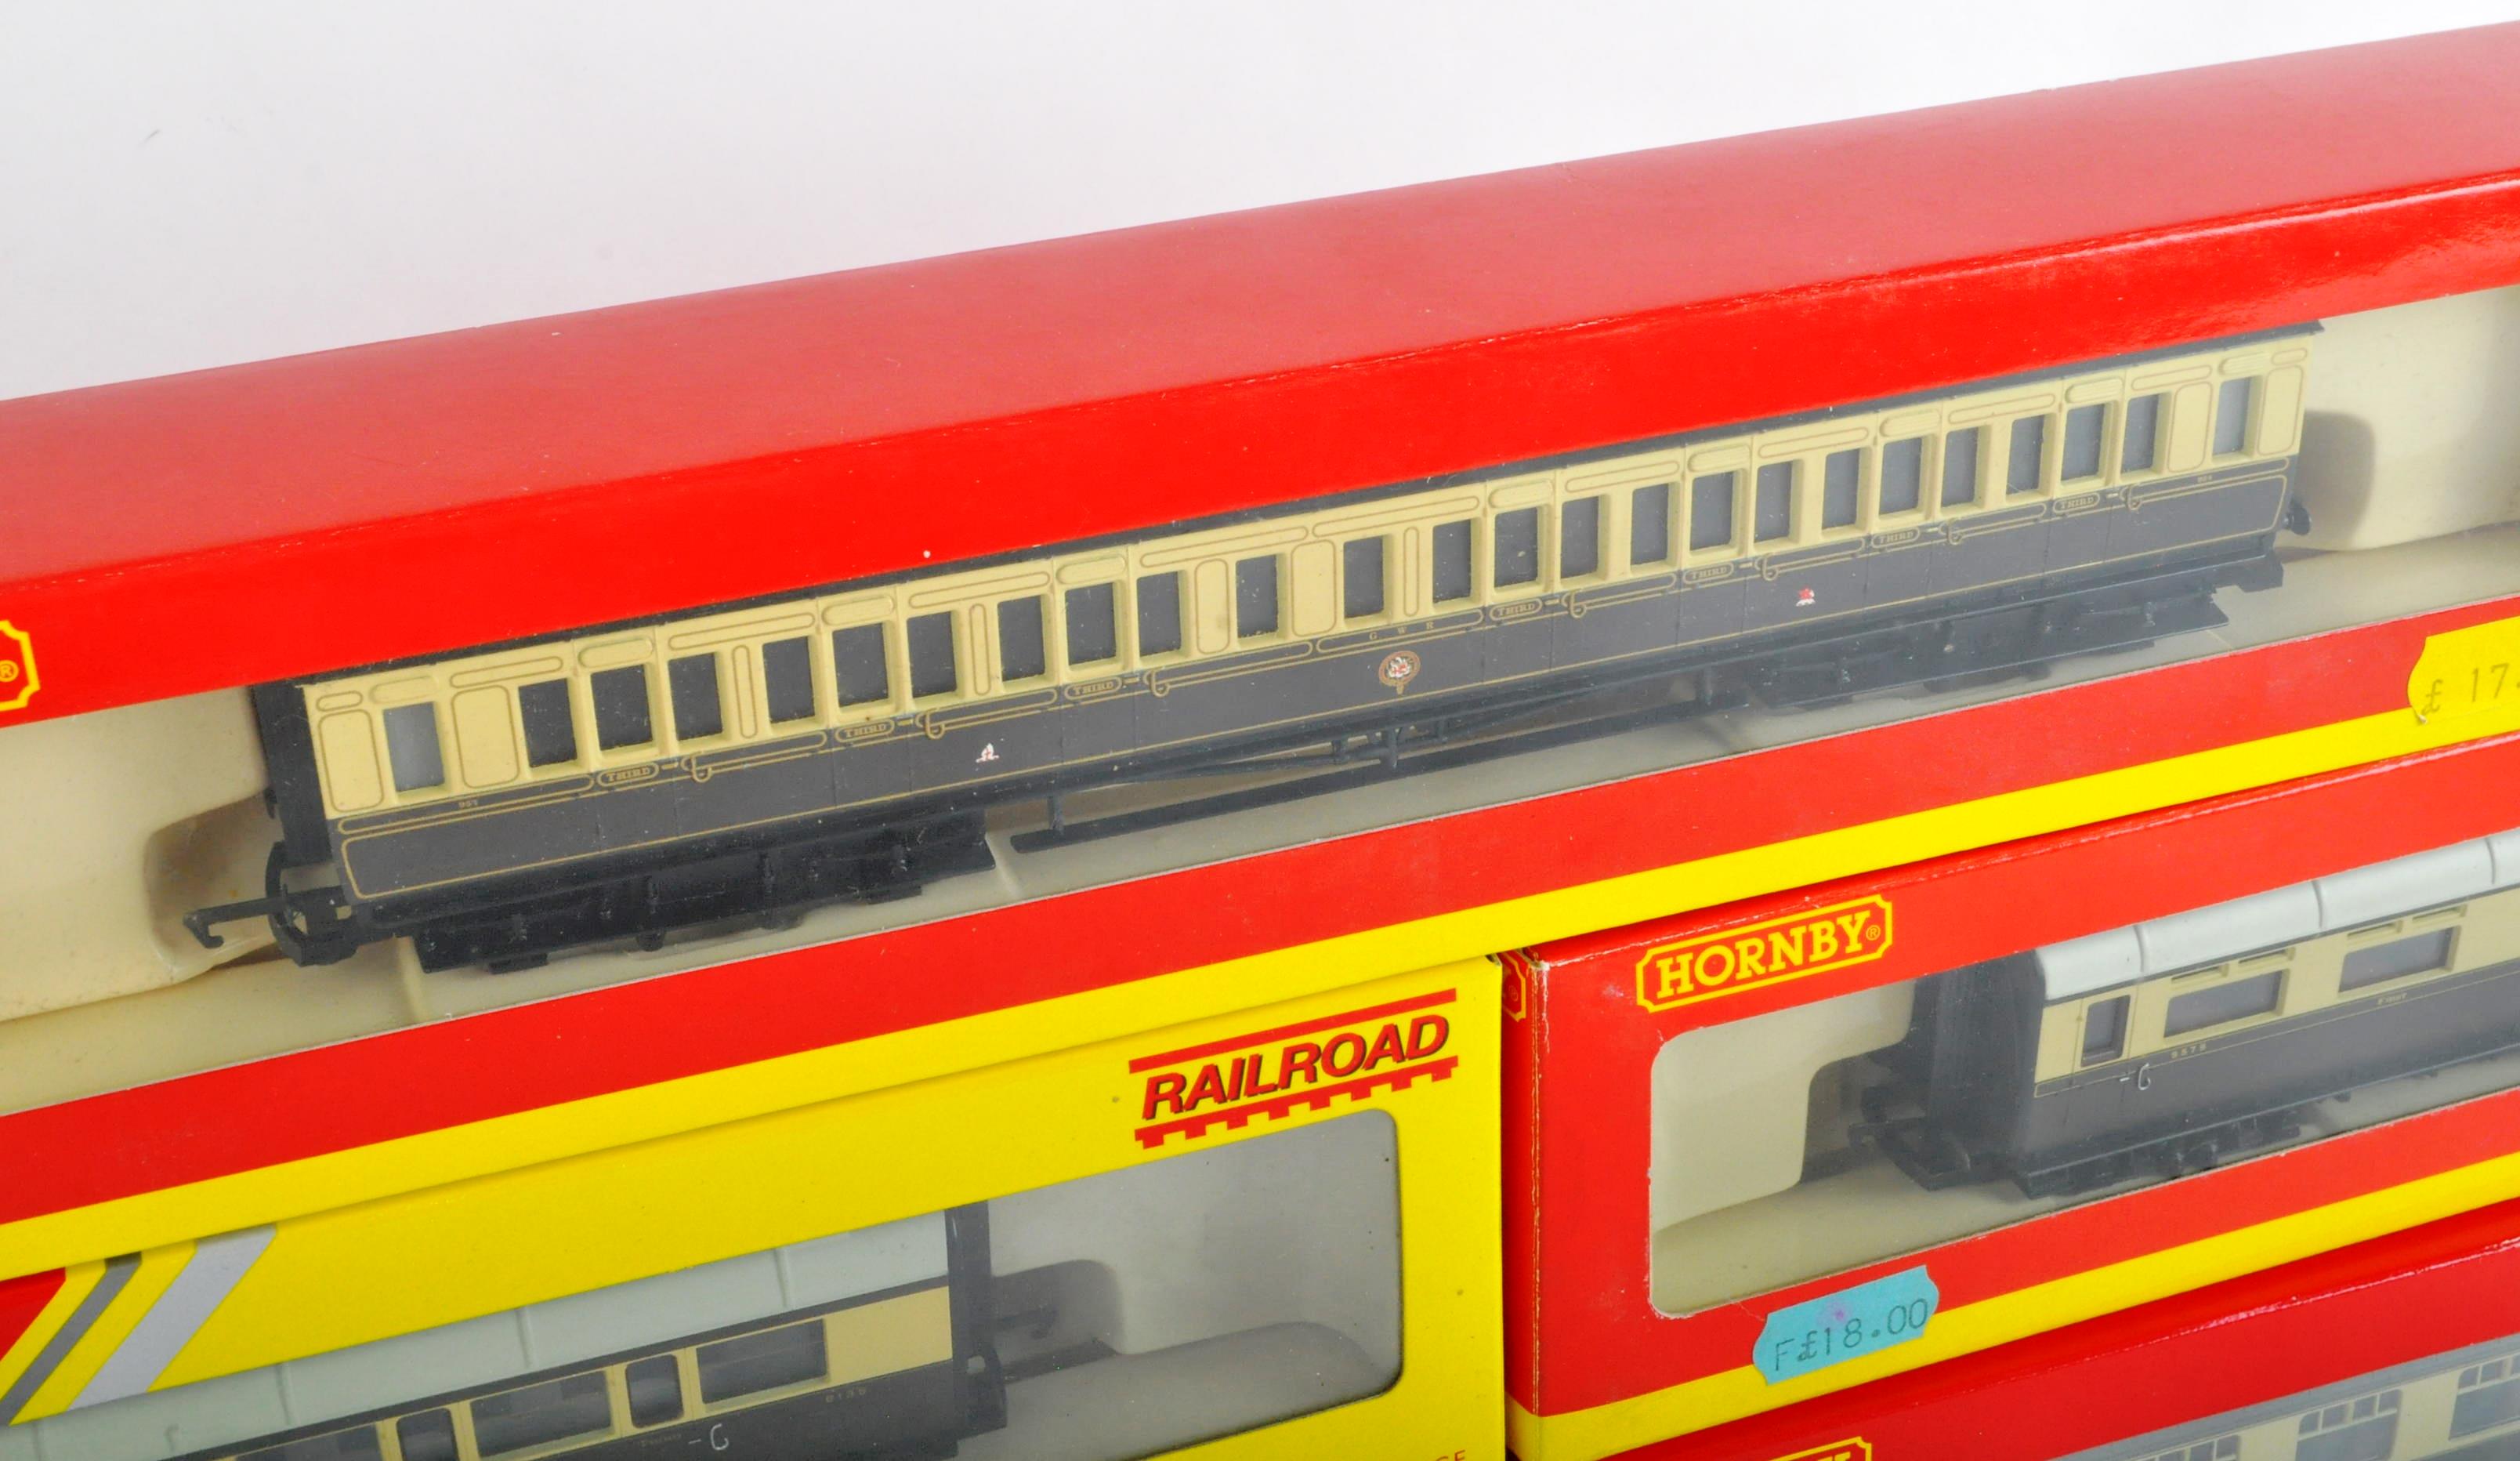 COLLECTION OF X5 HORNBY 00 GAUGE MODEL RAILWAY CARRIAGES - Image 2 of 5